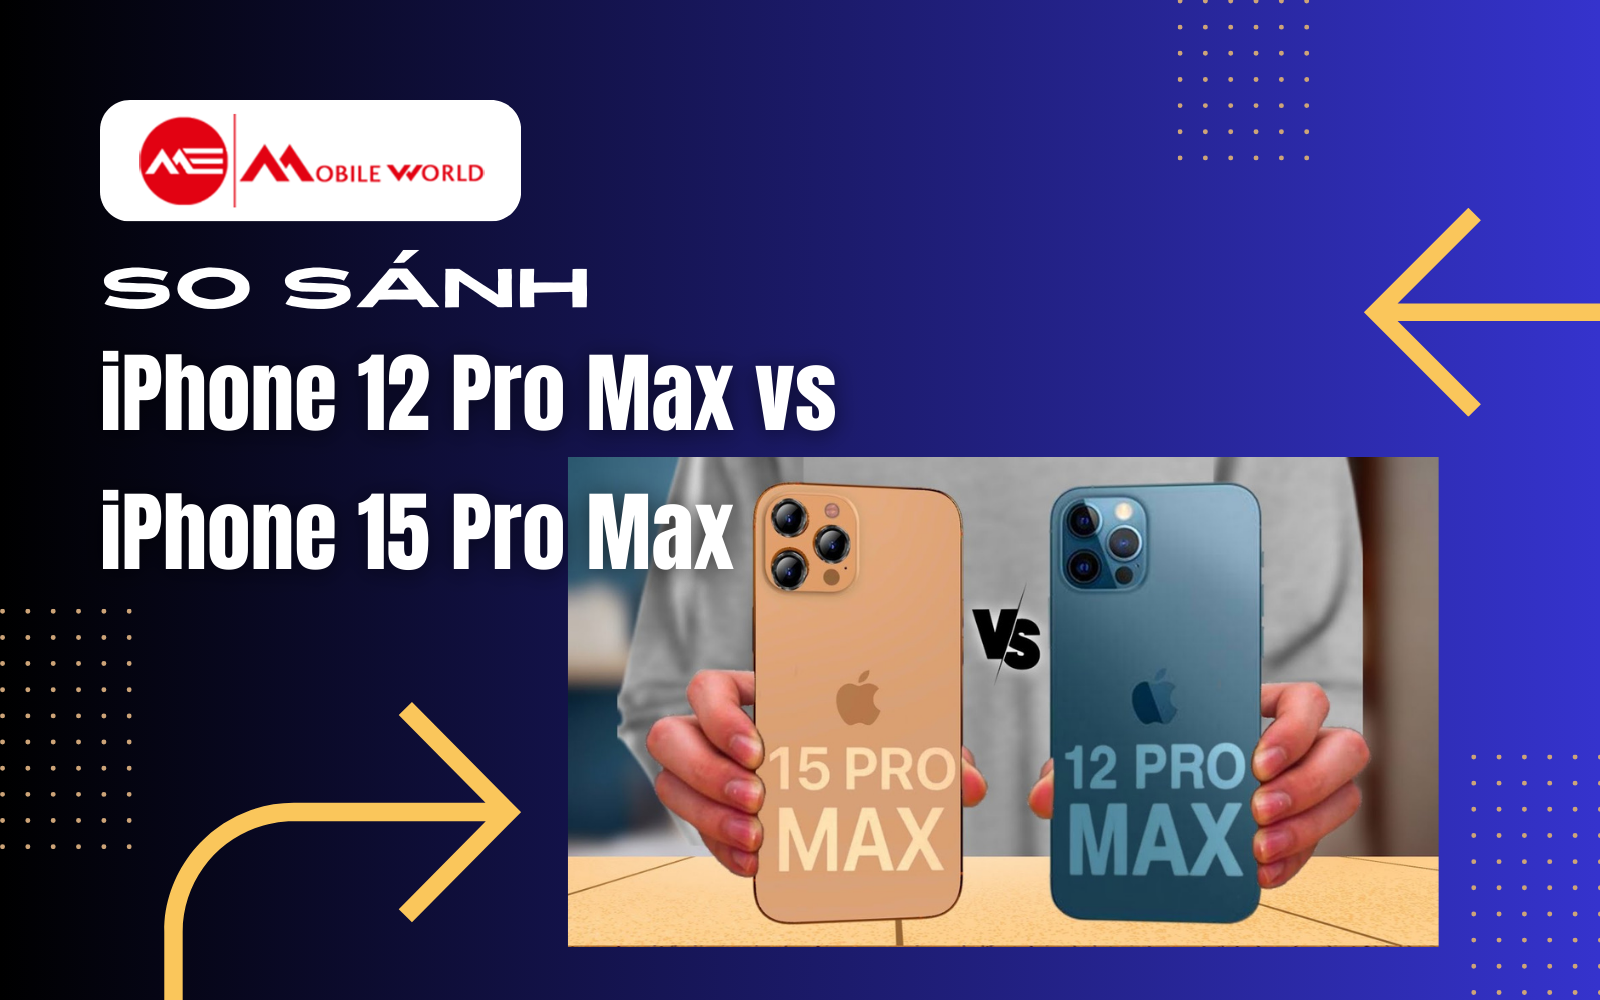 So sánh iPhone 12 Pro Max vs iPhone 15 Pro Max